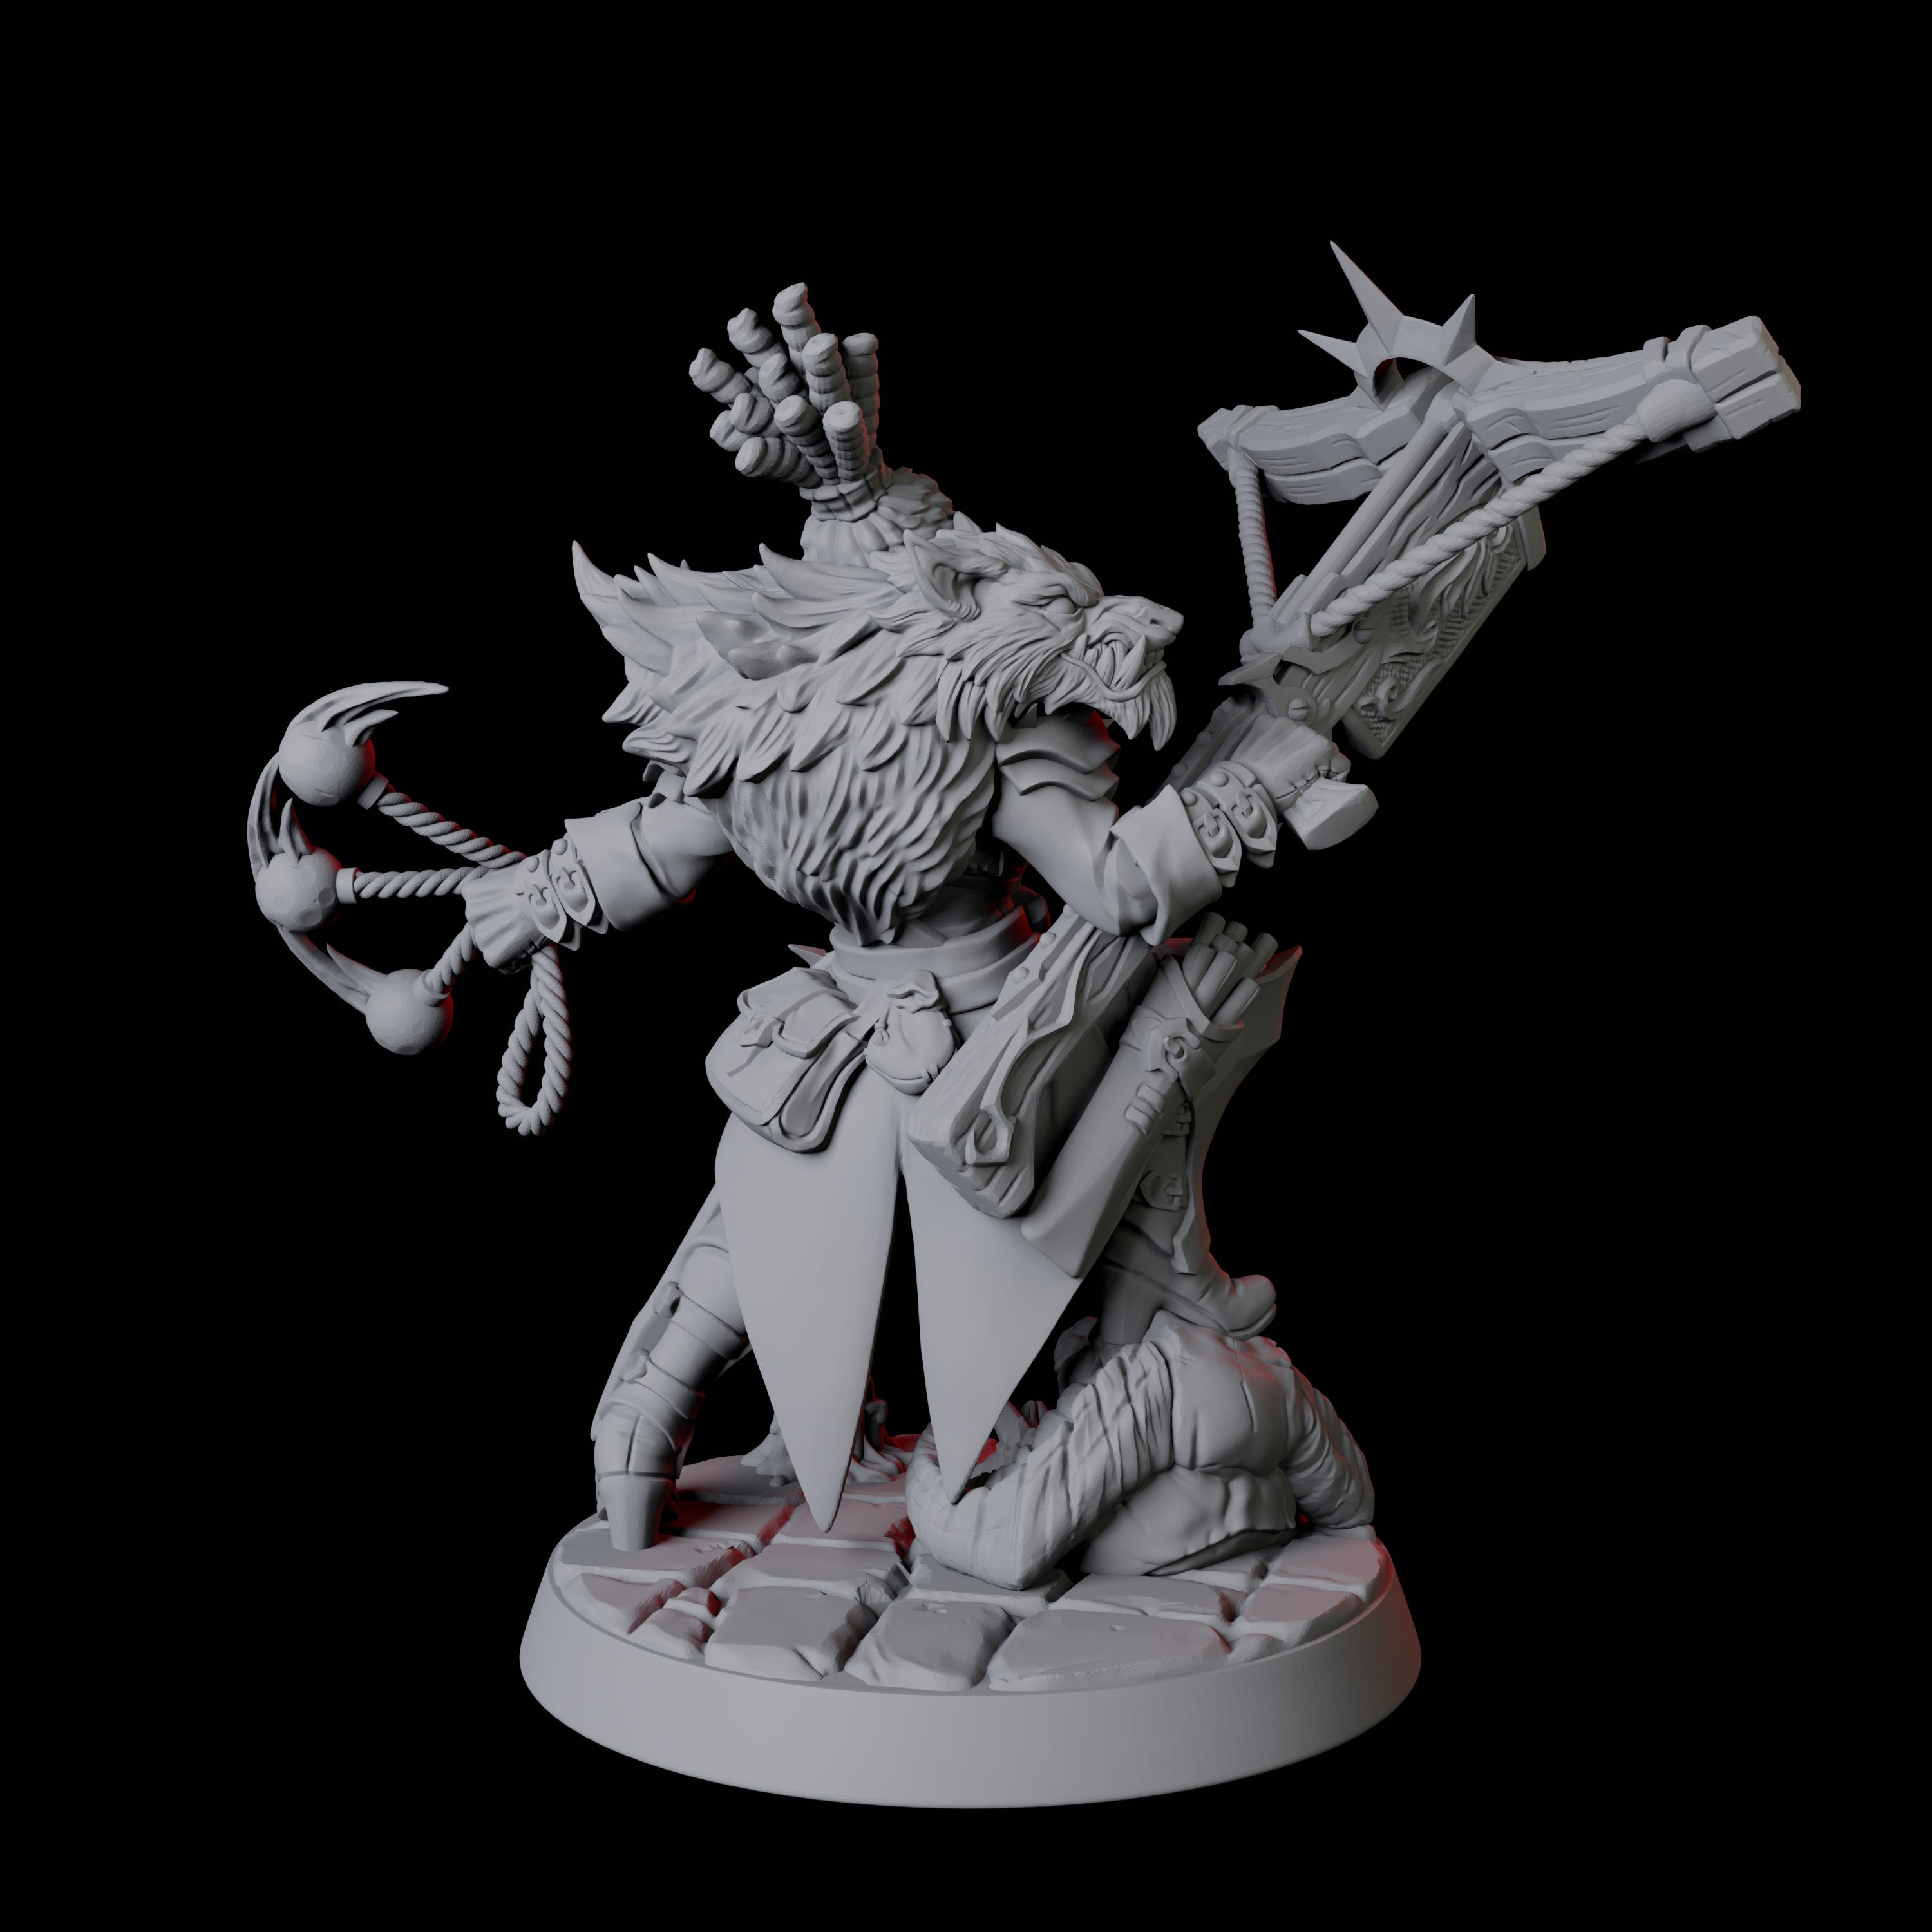 Mistress Vampire Hunter Miniature for Dungeons and Dragons, Pathfinder or other TTRPGs